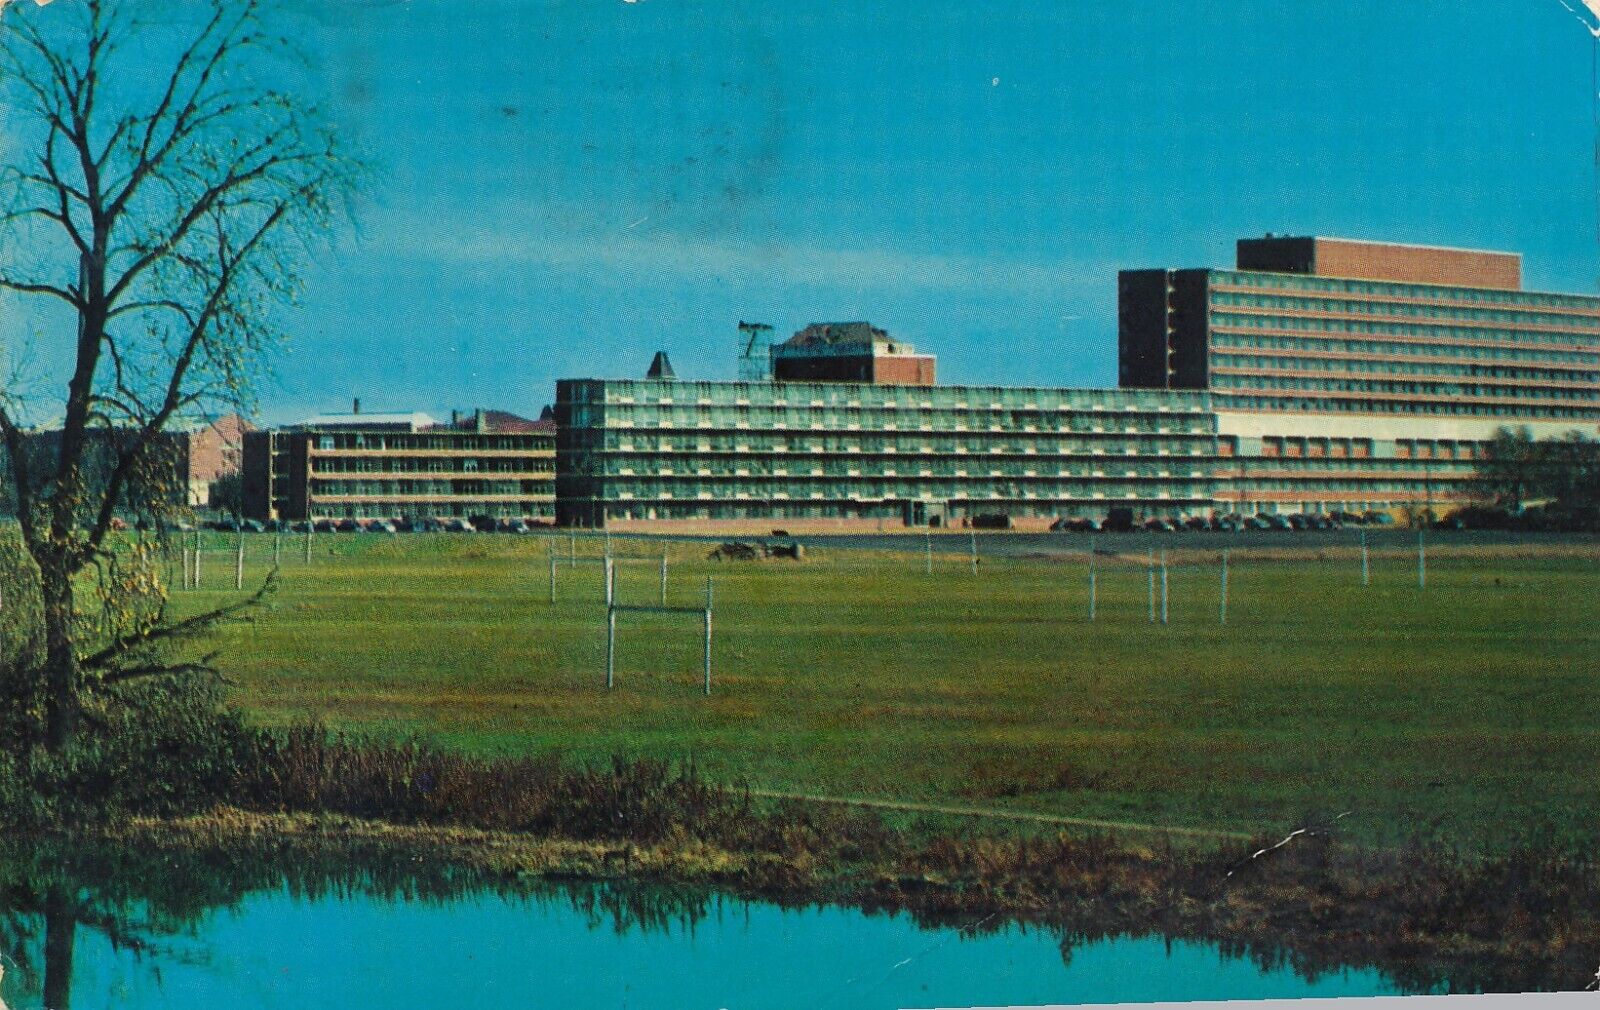 Medical Health Center at Ohio State University in Columbus, Ohio 1974 posted